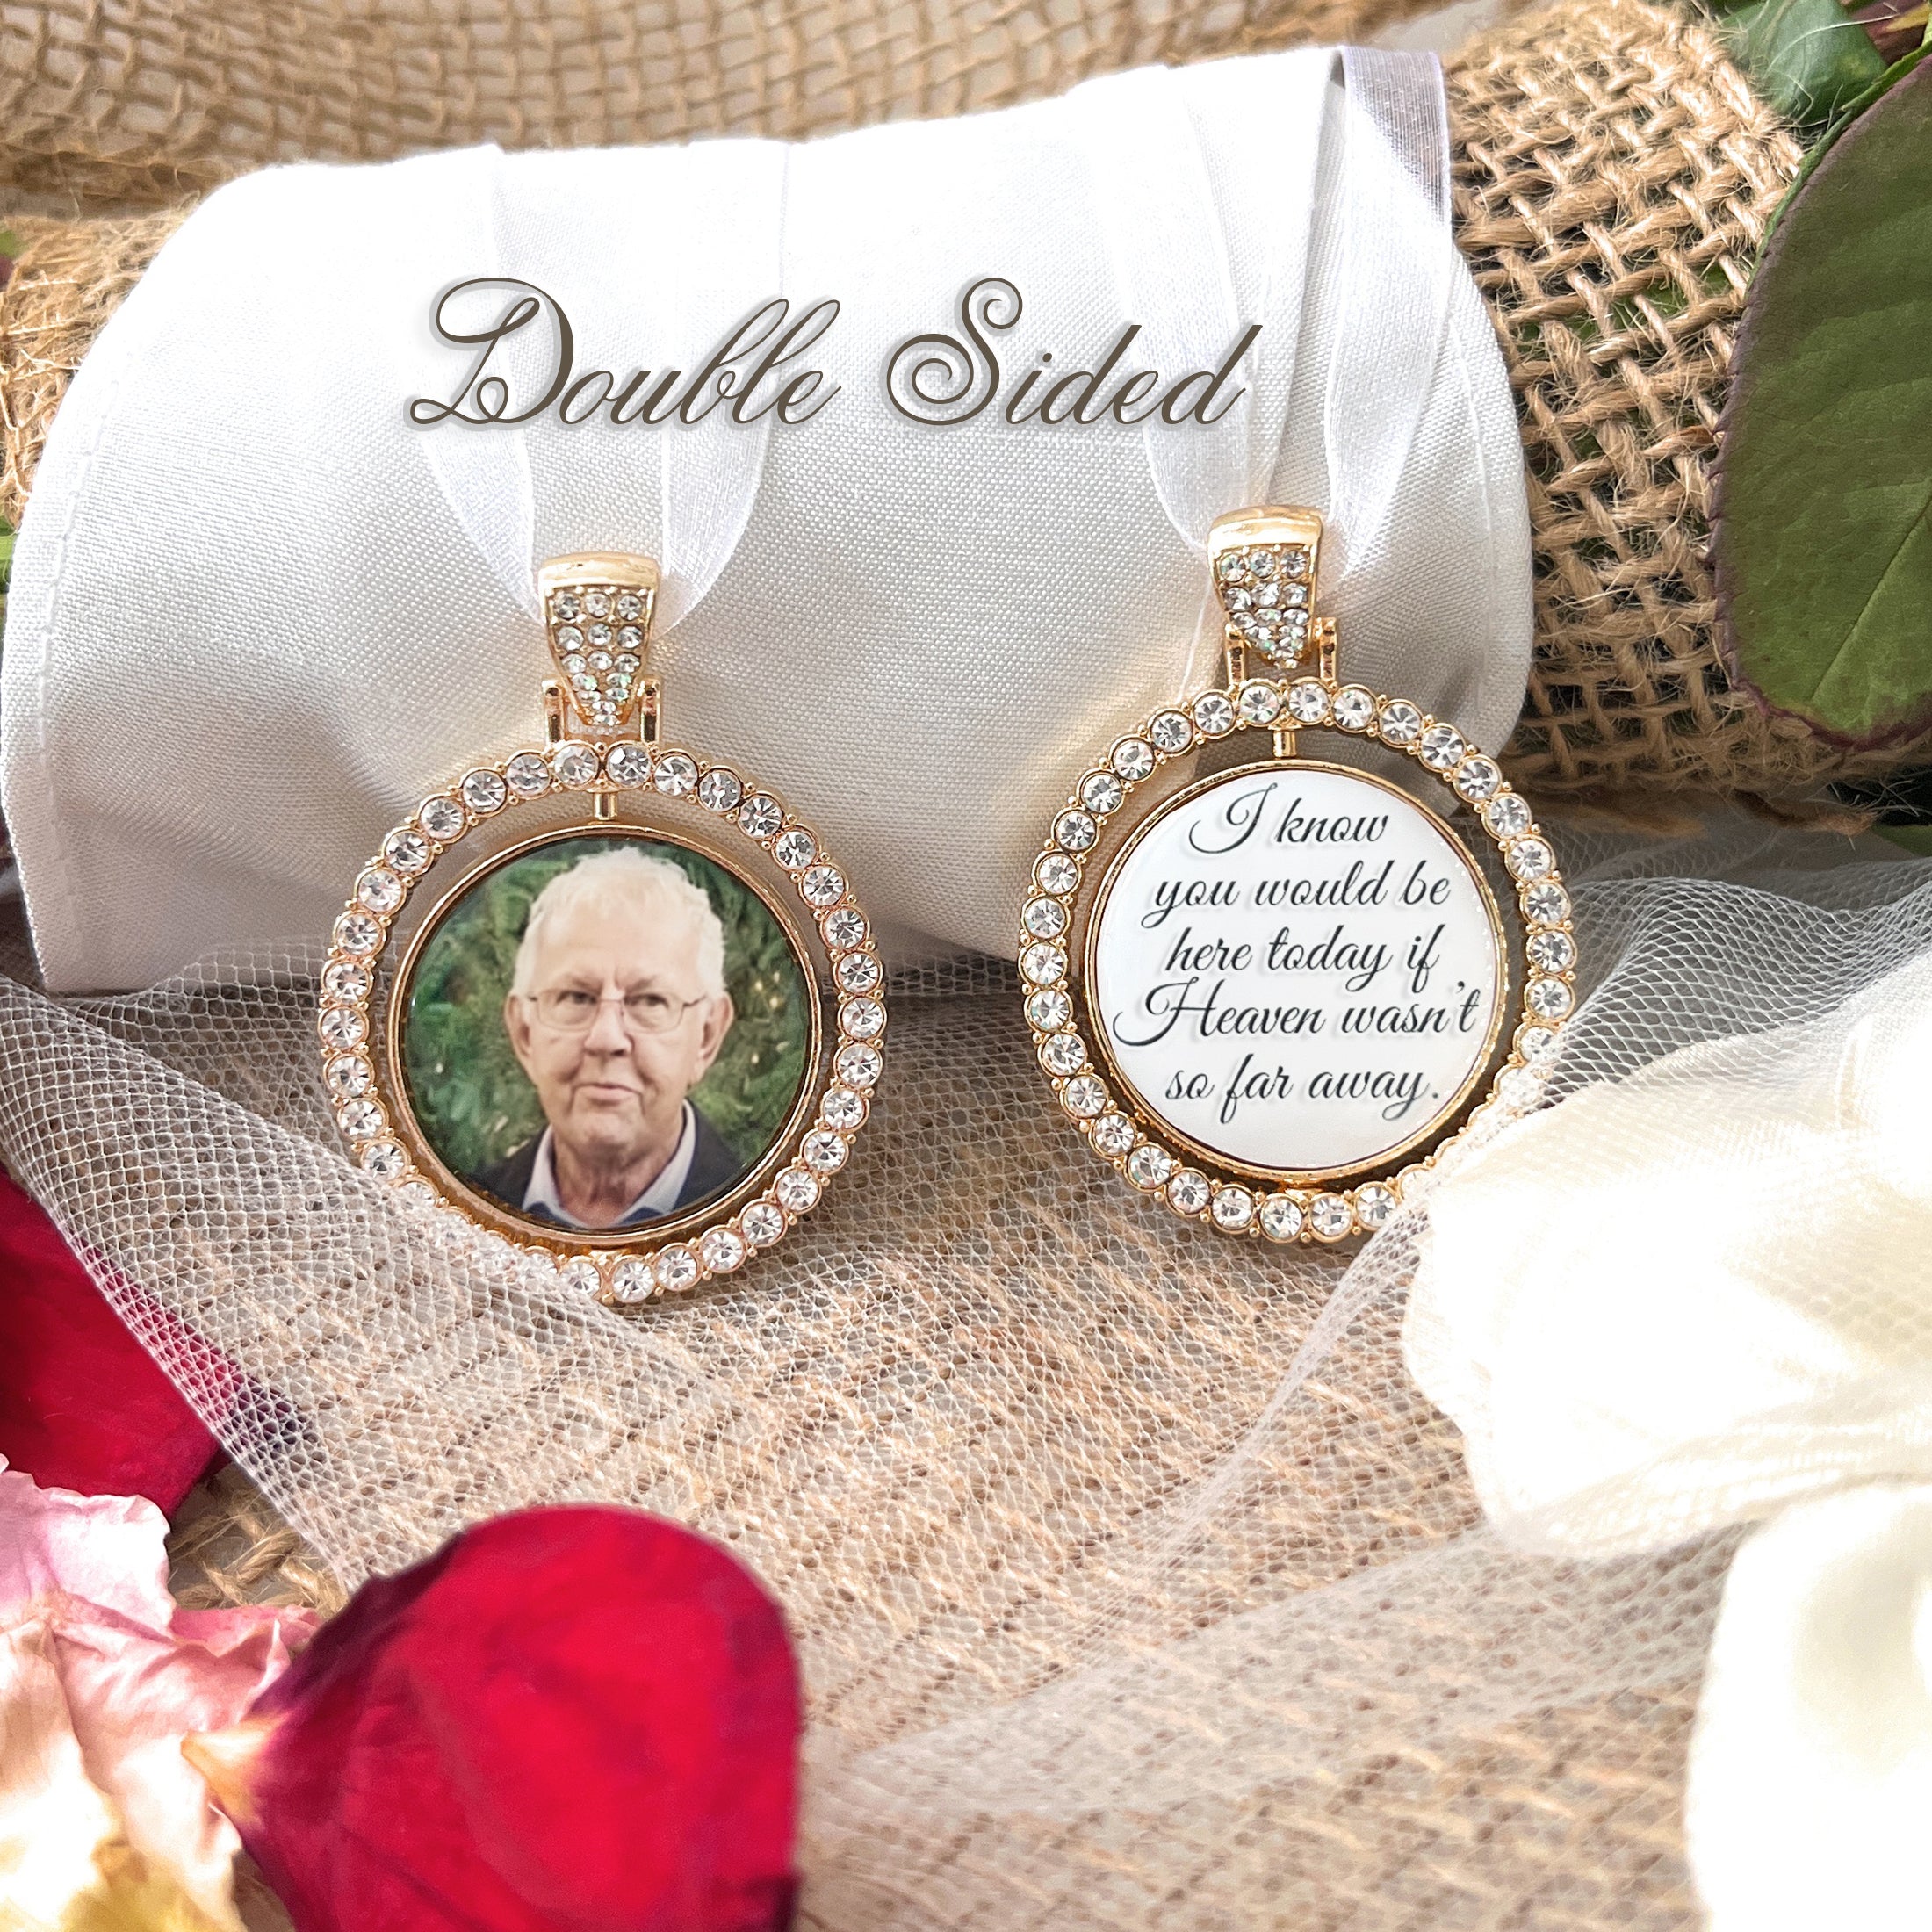 Bridal Memorial Photo Bouquet Charm-double sided rotating pendant with rhinestones around edge. Center contains a custom photo (roughly 1 inch) on one side and custom saying on backside. I know you would be here today if heaven wasn't so far away